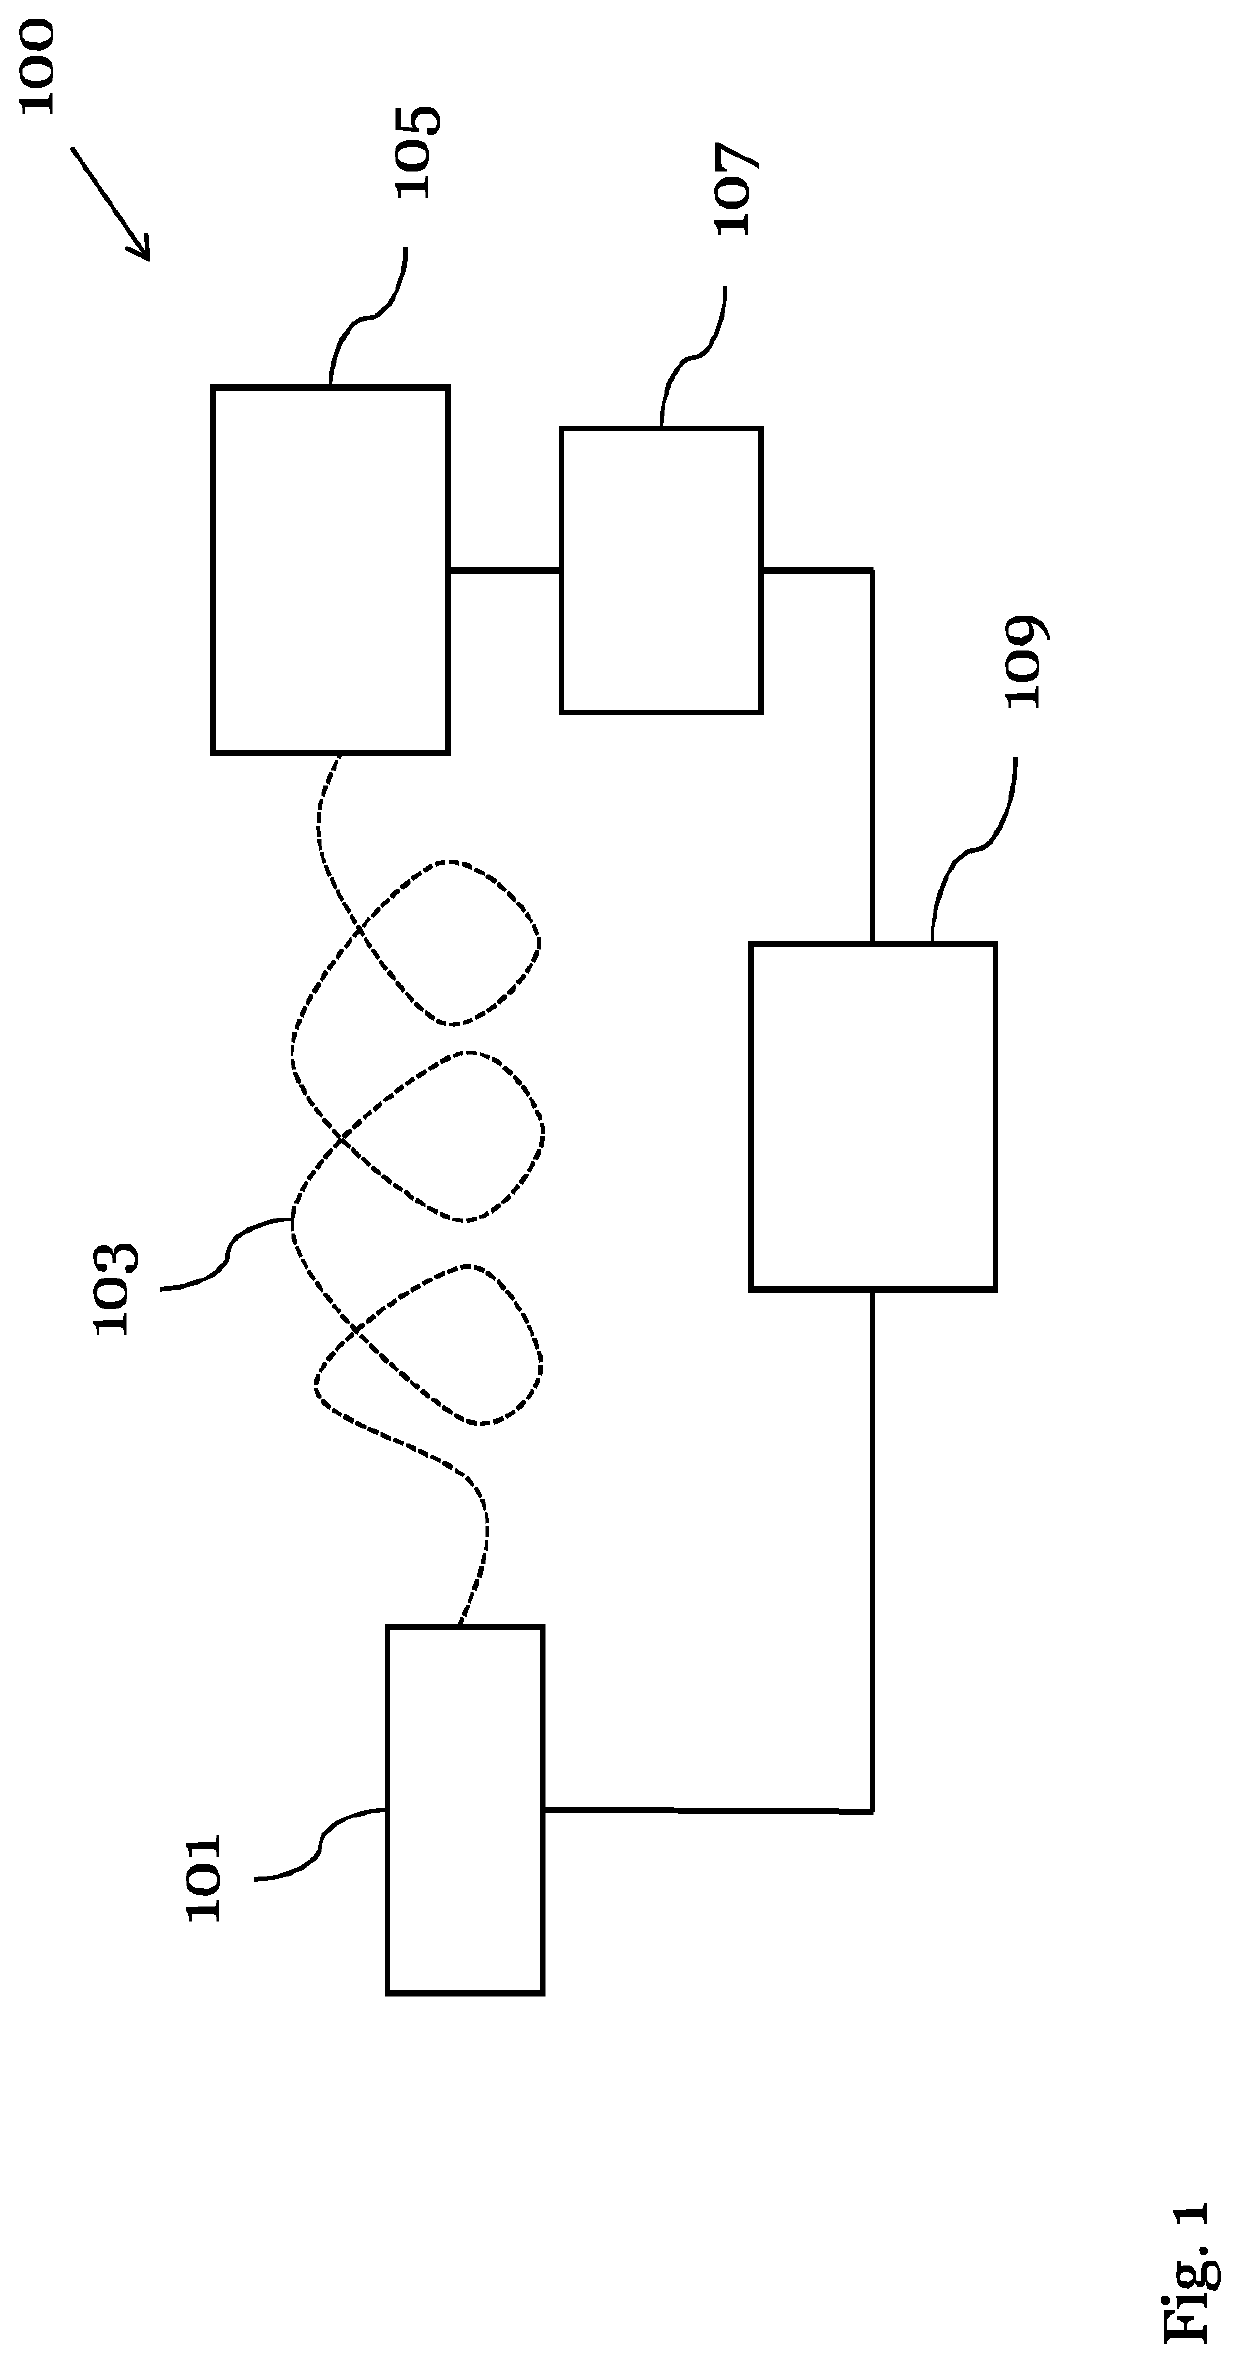 Power-over-fiber system and method for operating a power-over-fiber system